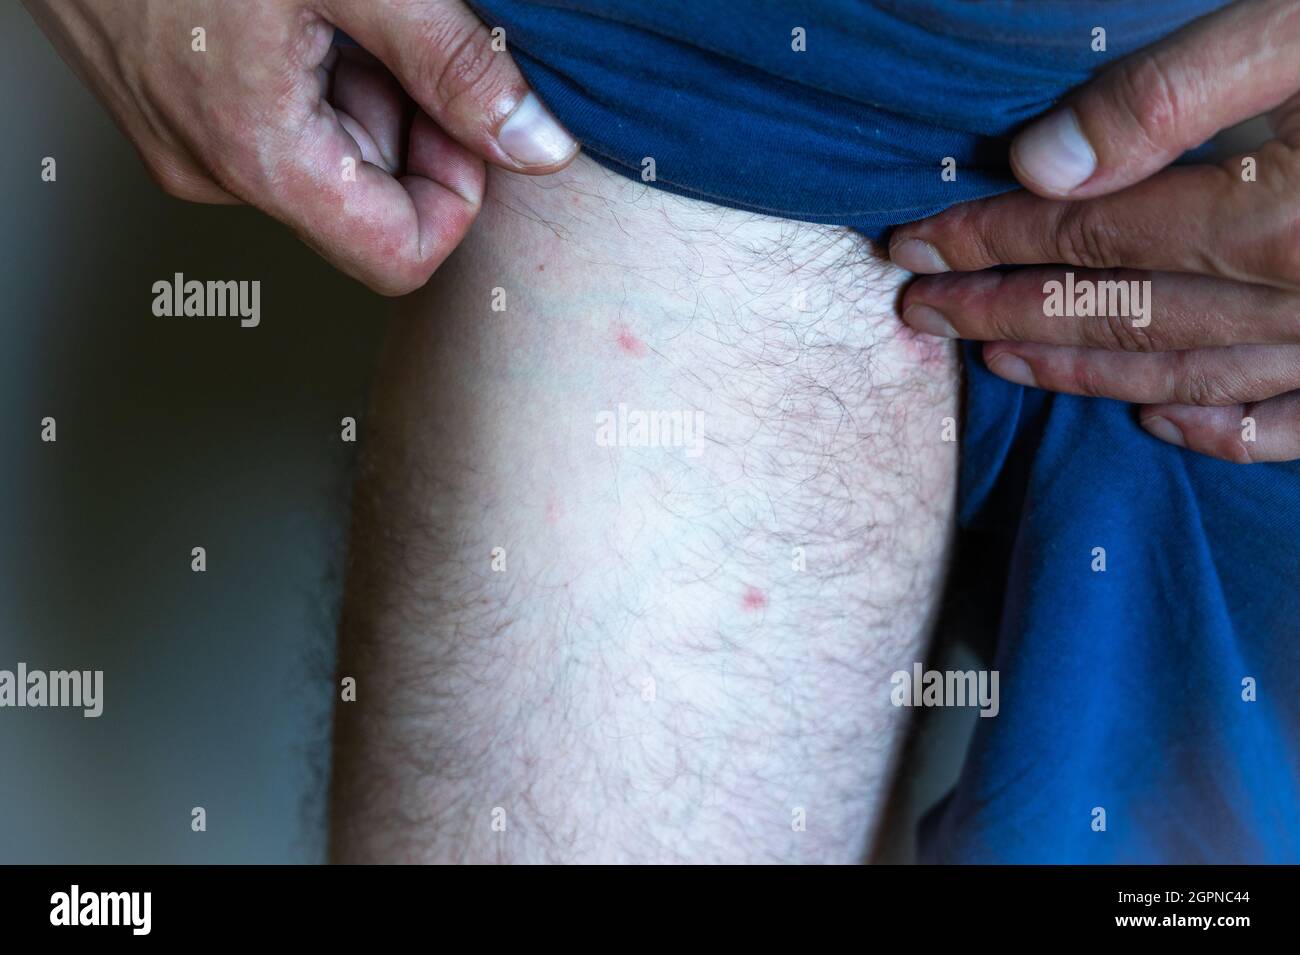 A rash on a man's leg near the intimate area. Man with symptoms of itchy urticaria. Stock Photo